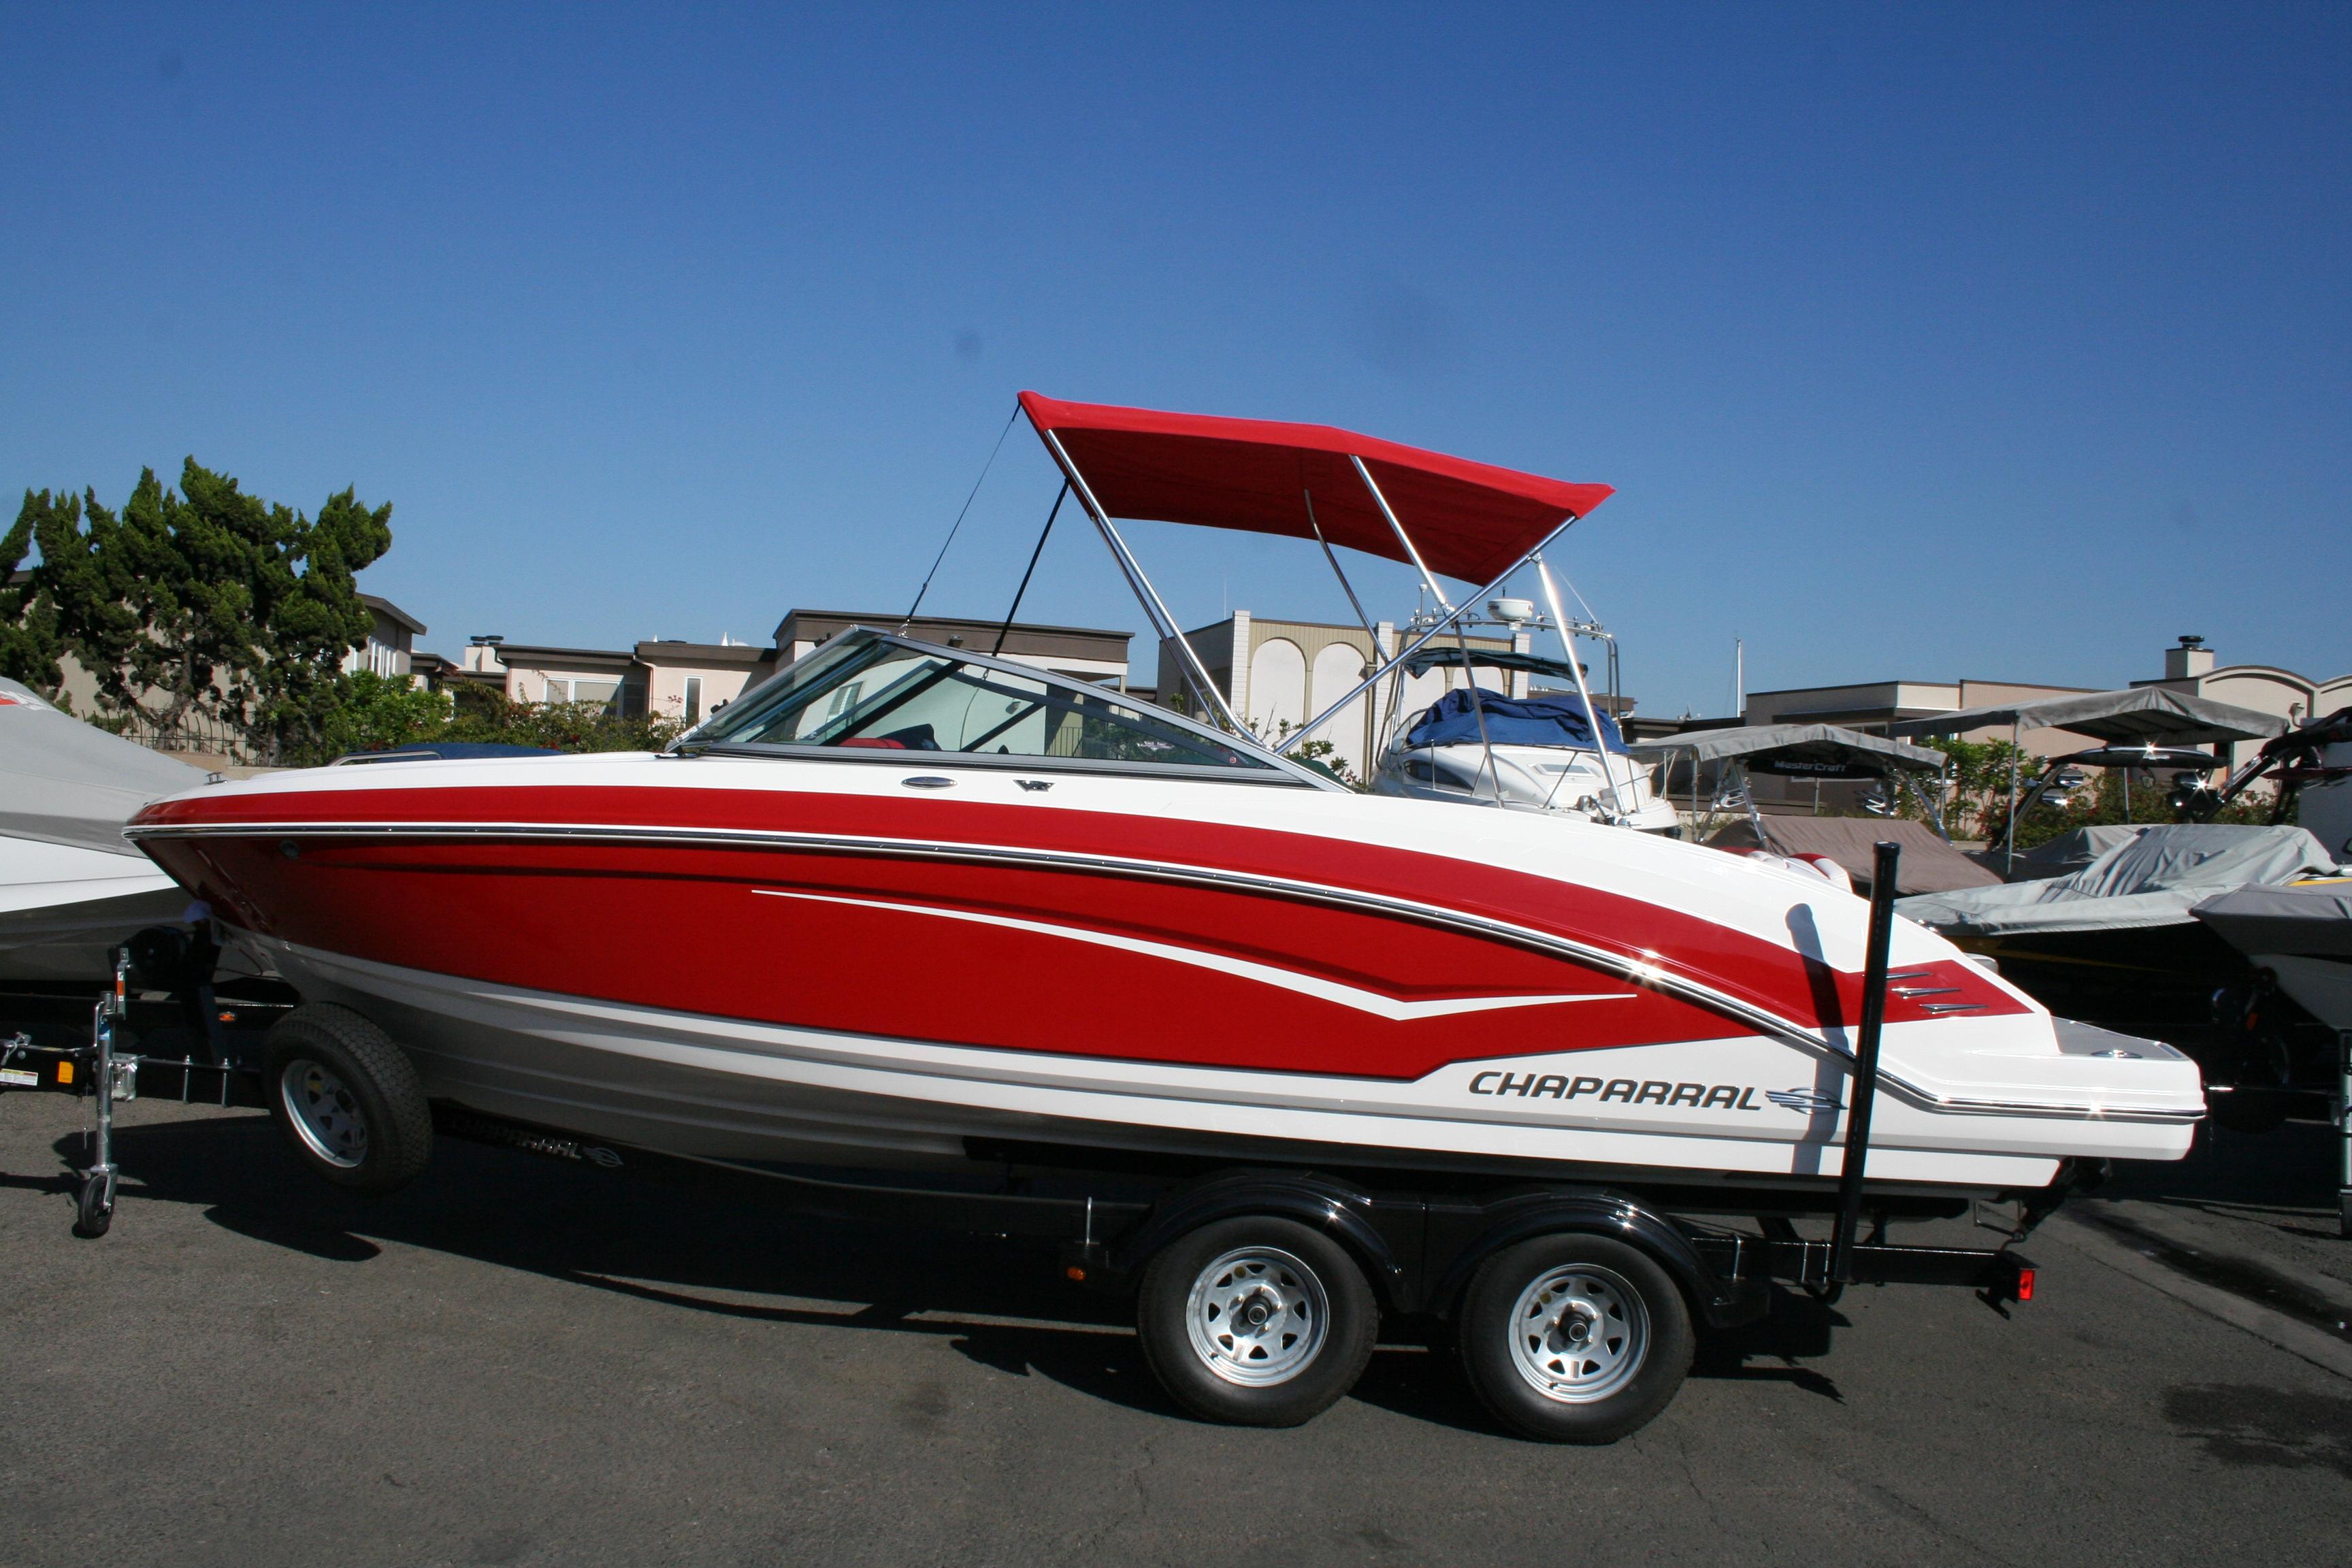 22 Foot Boats for Sale | Boat listings